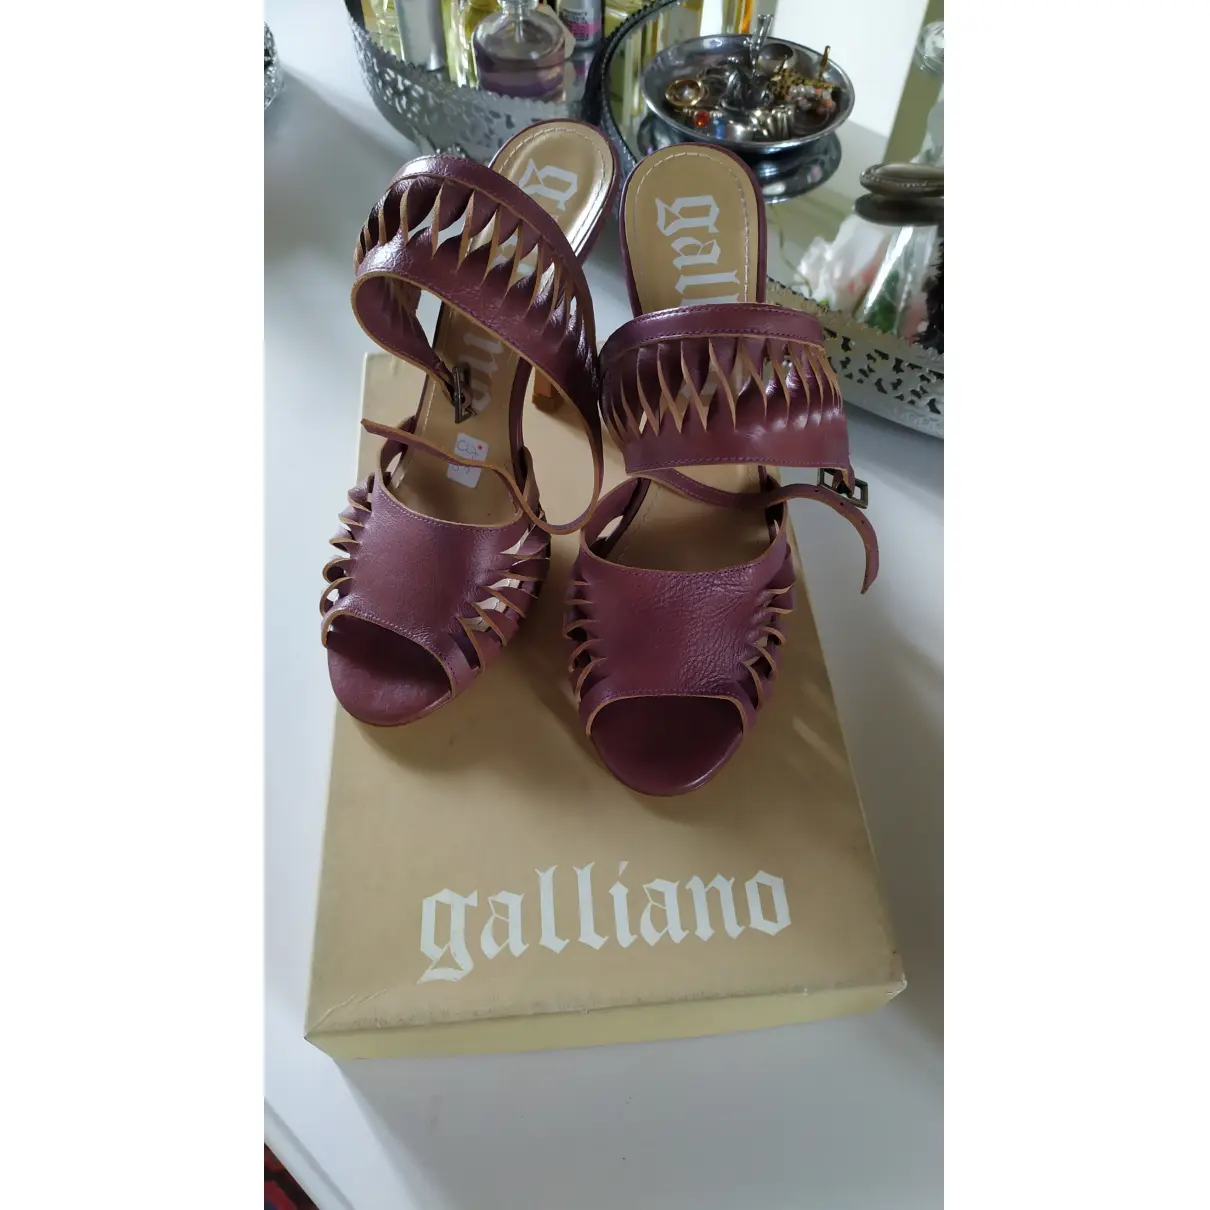 Buy Galliano Leather sandals online